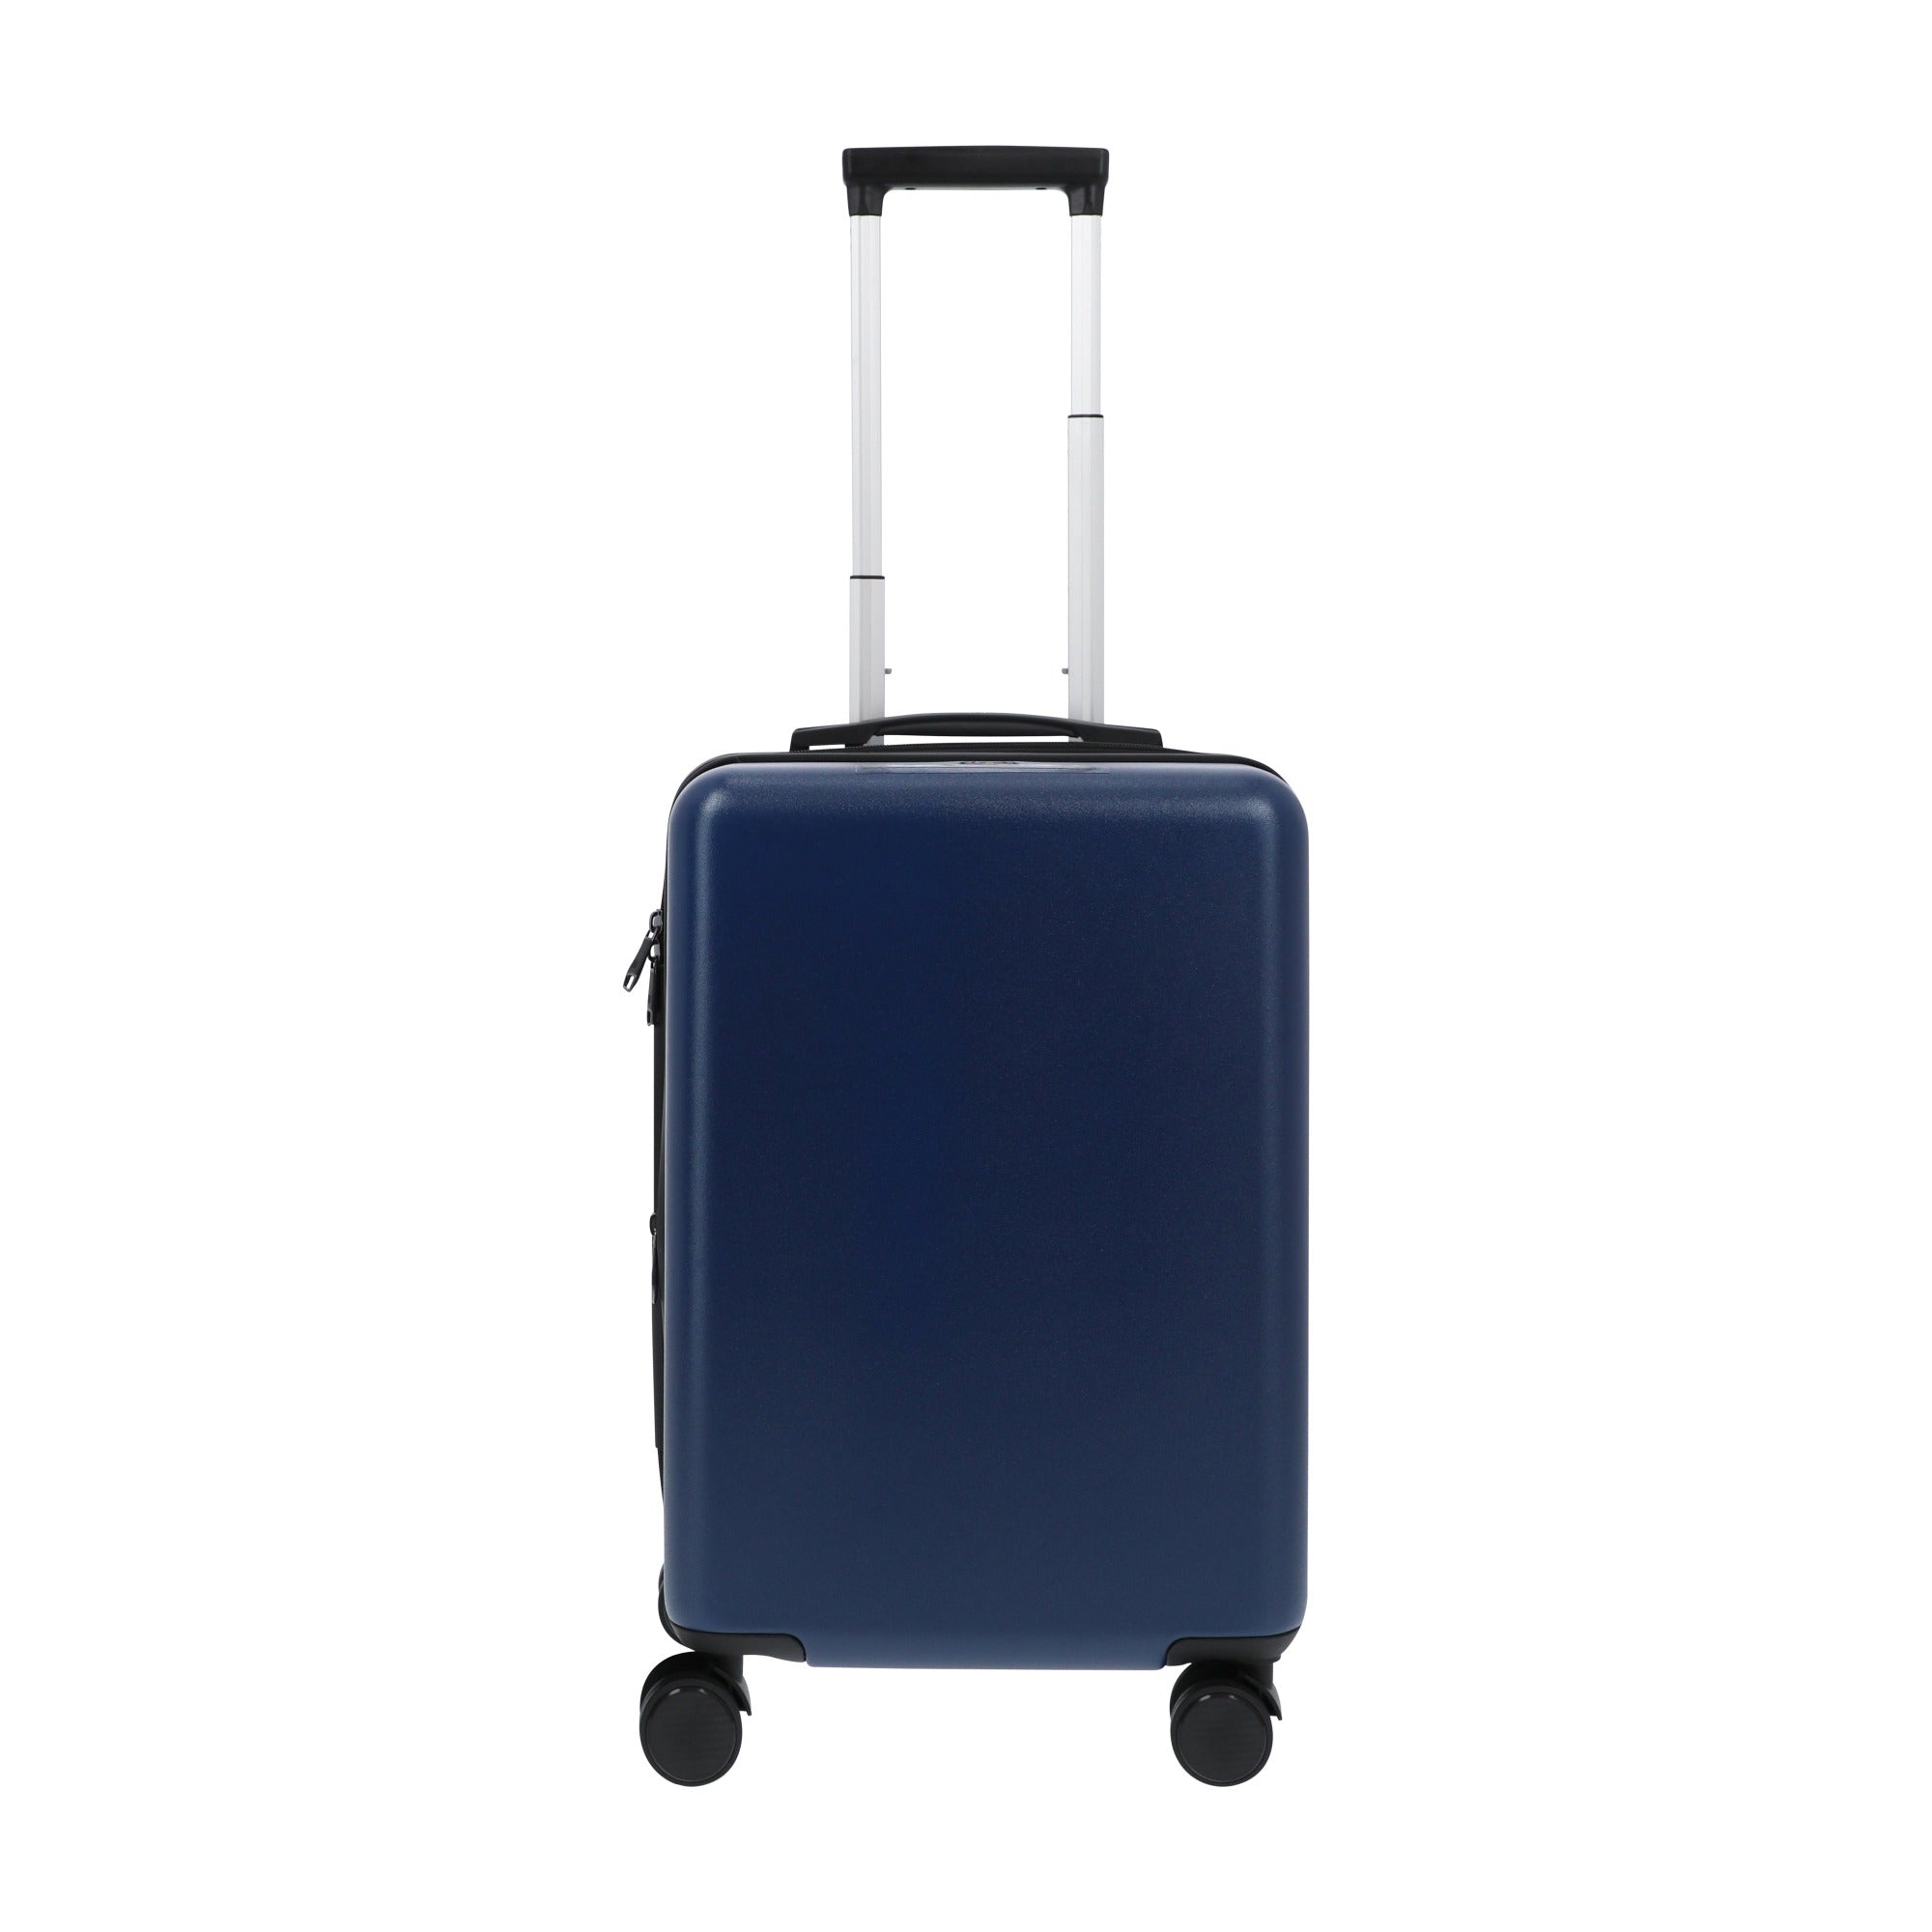 Navy blue 22.5" carry-on spinner suitcase luggage by Ful